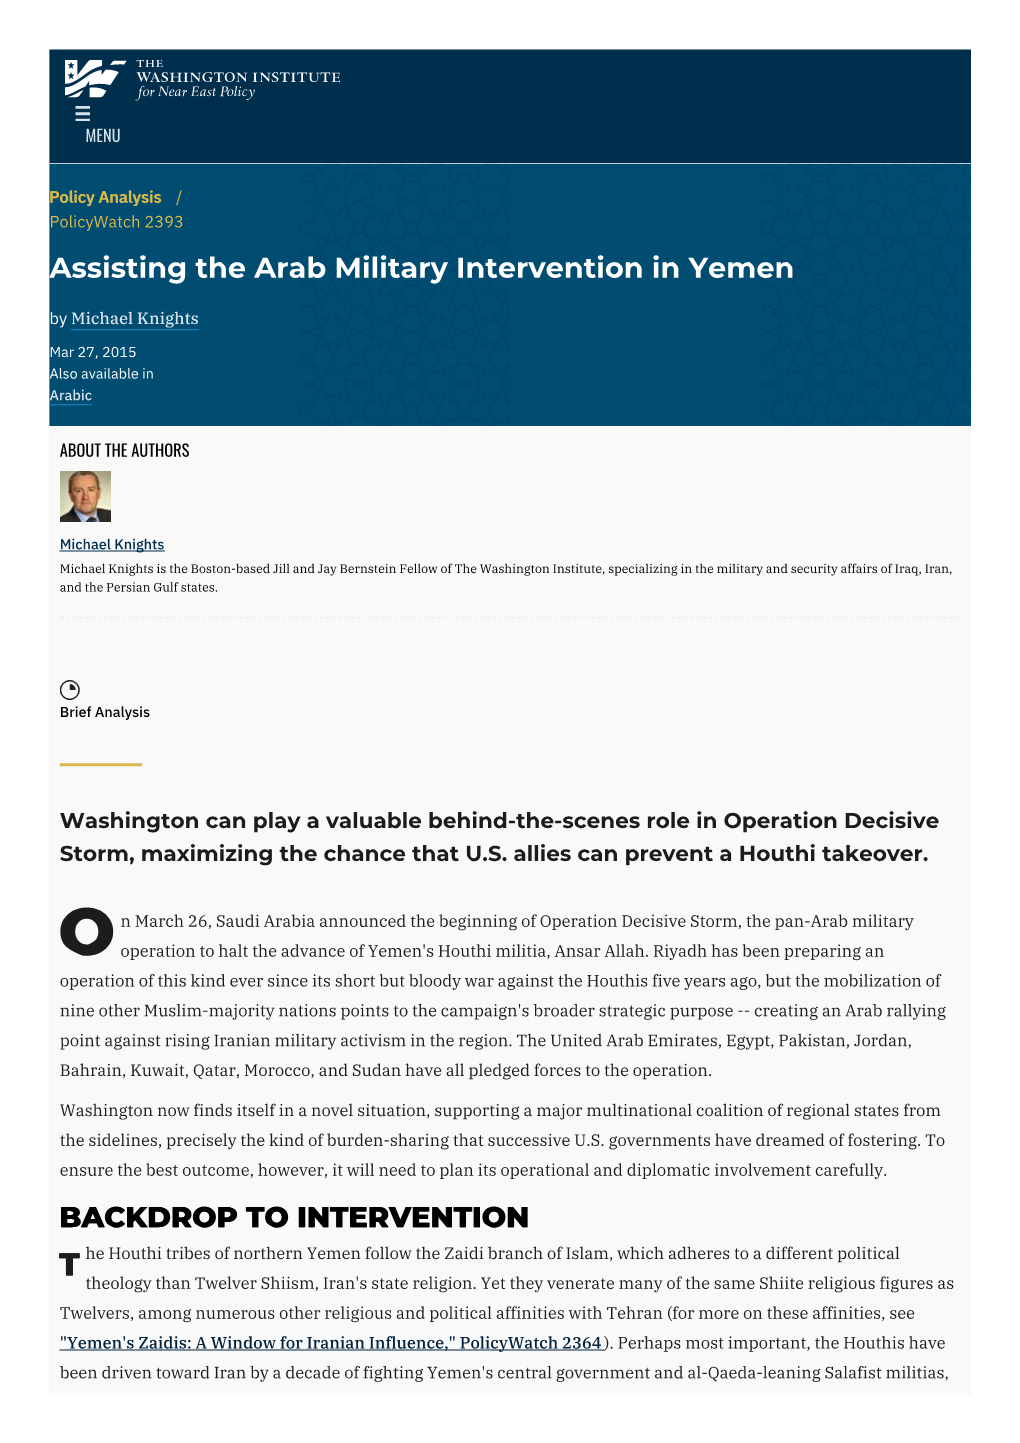 Assisting the Arab Military Intervention in Yemen | the Washington Institute